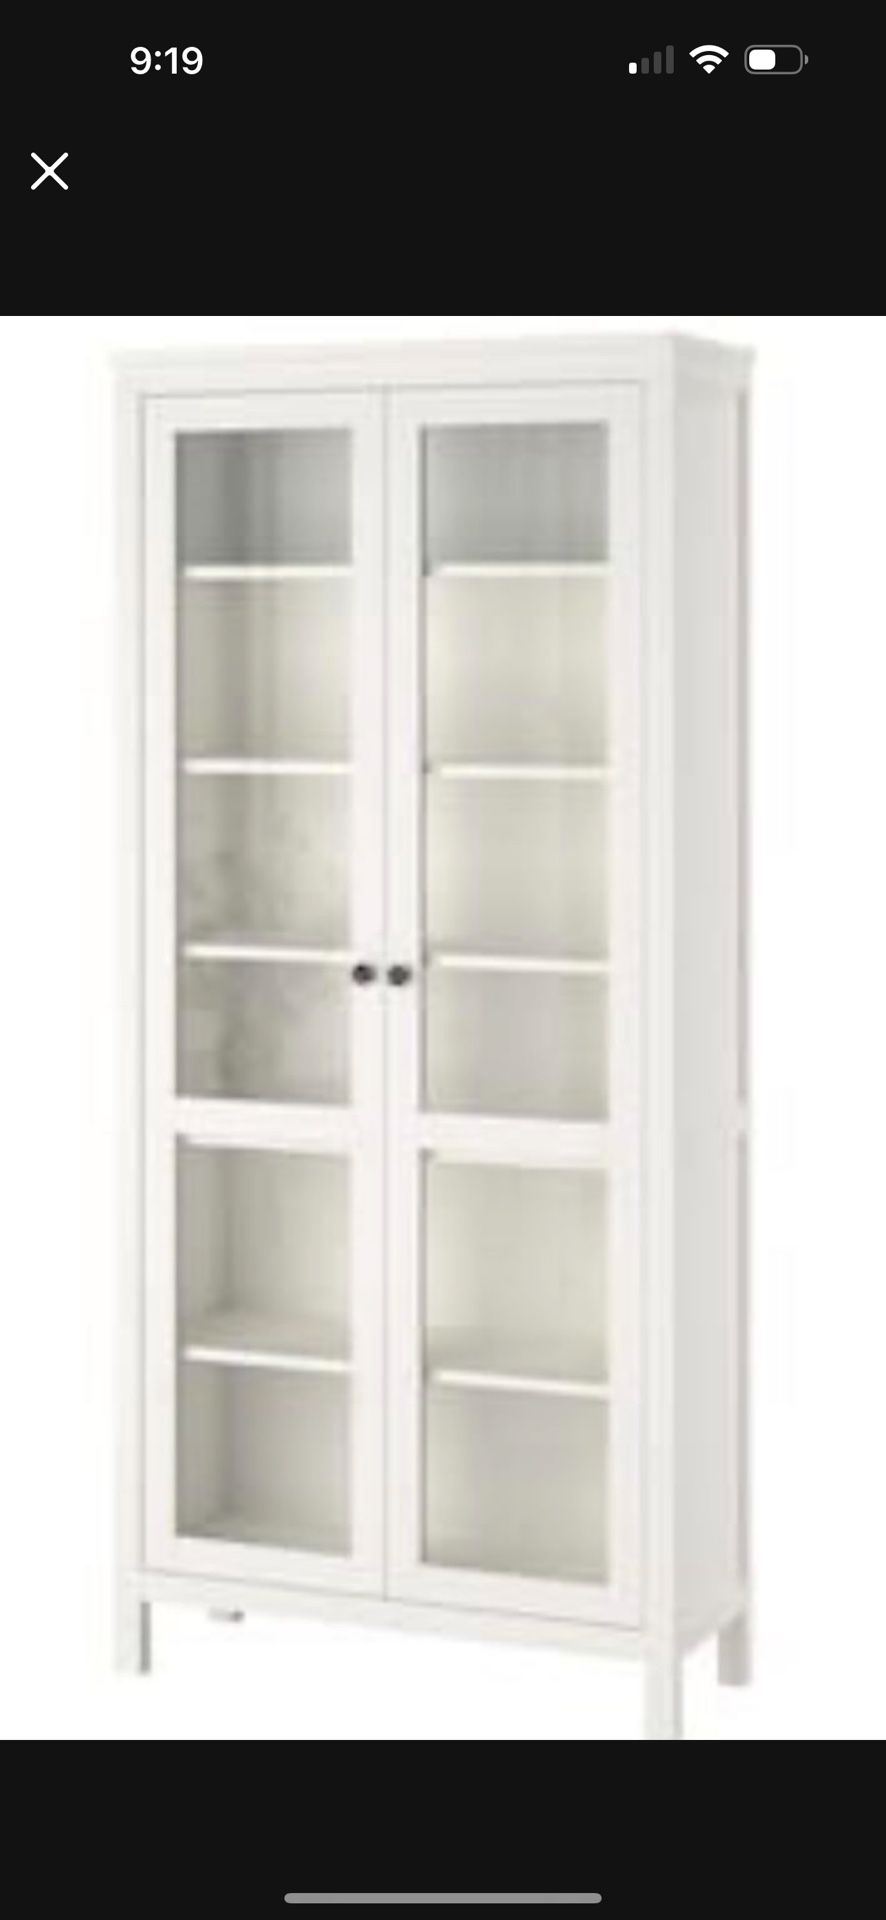 Cabinet / Bookcase With Glass Doors